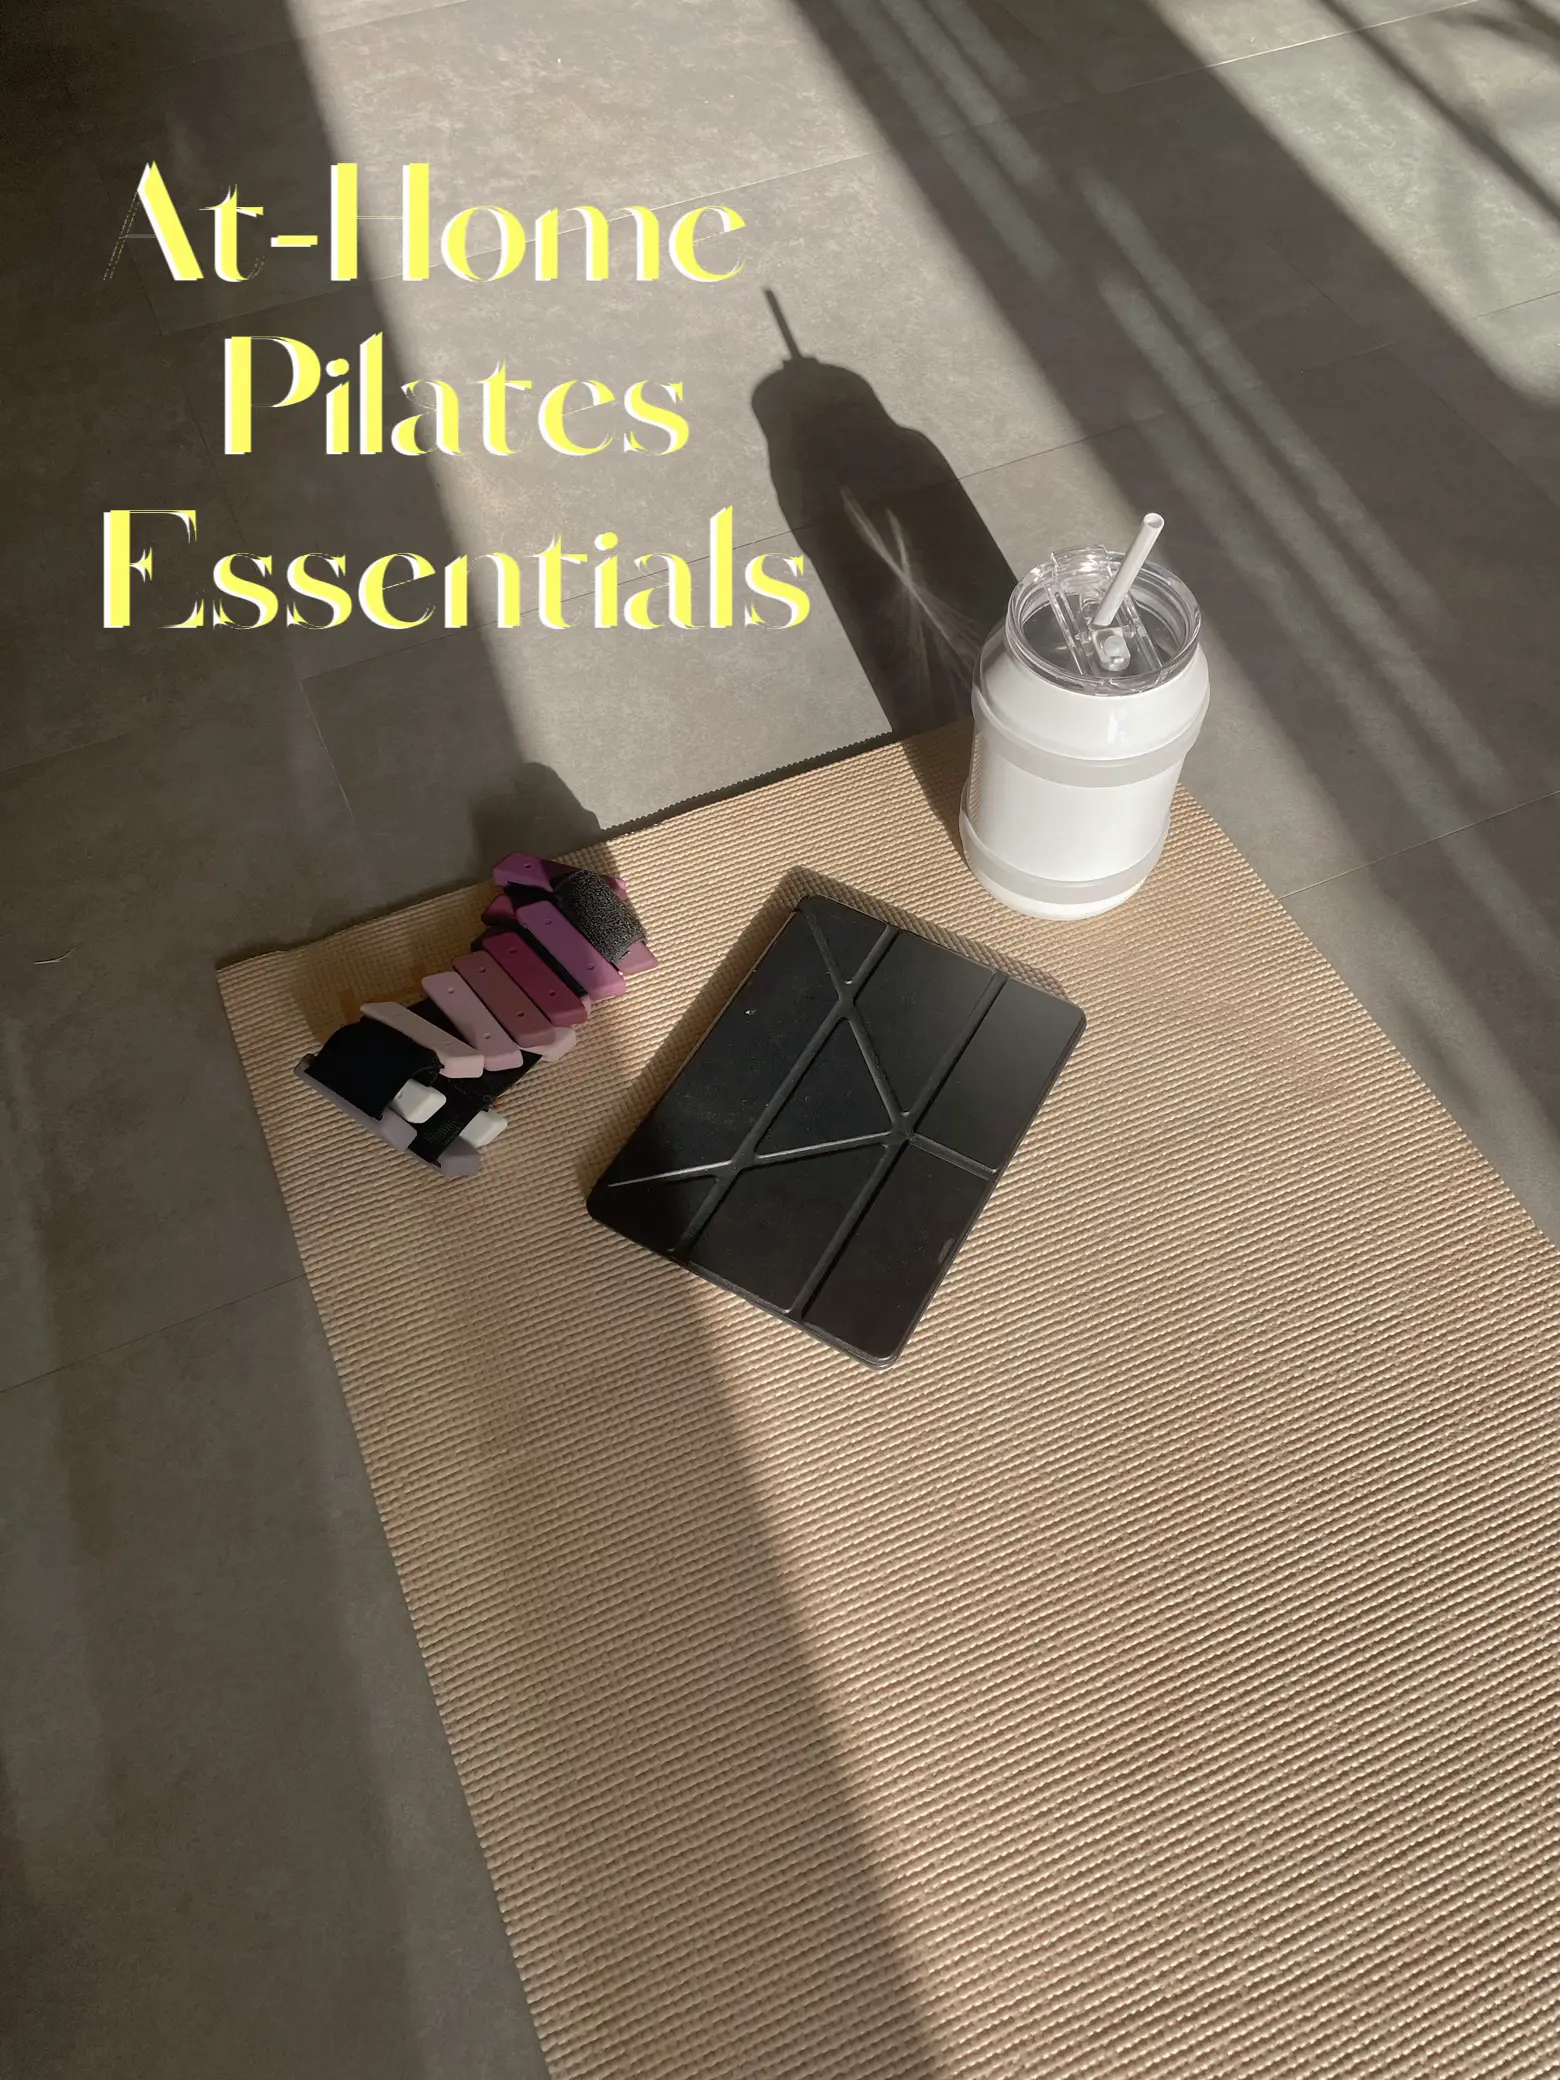 At-Home Pilates Essentials, Gallery posted by Andrea Colón 🌺